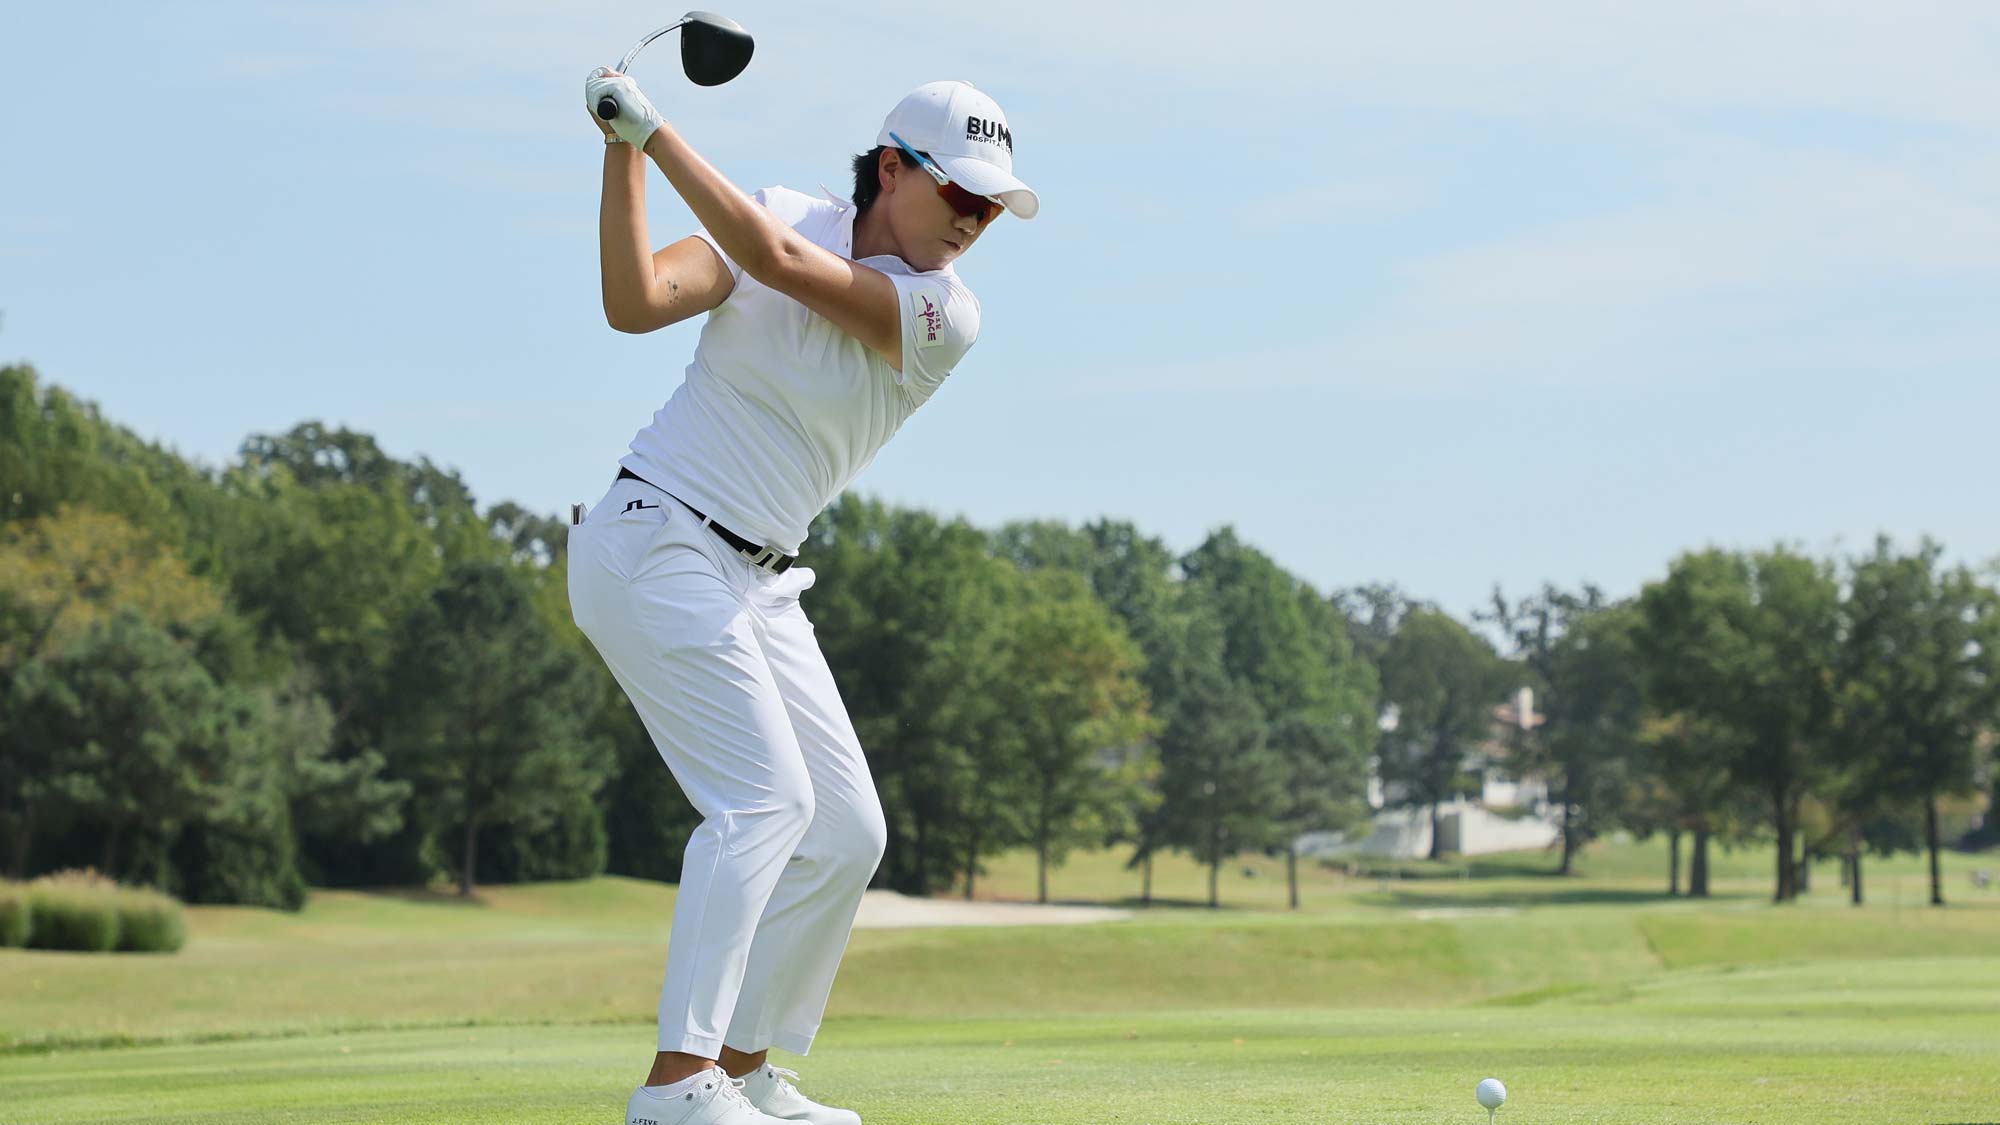 Jeongeun Lee 5 of South Korea hits her tee shot on the 7th hole during the second round of the Walmart NW Arkansas Championship Presented by P&G